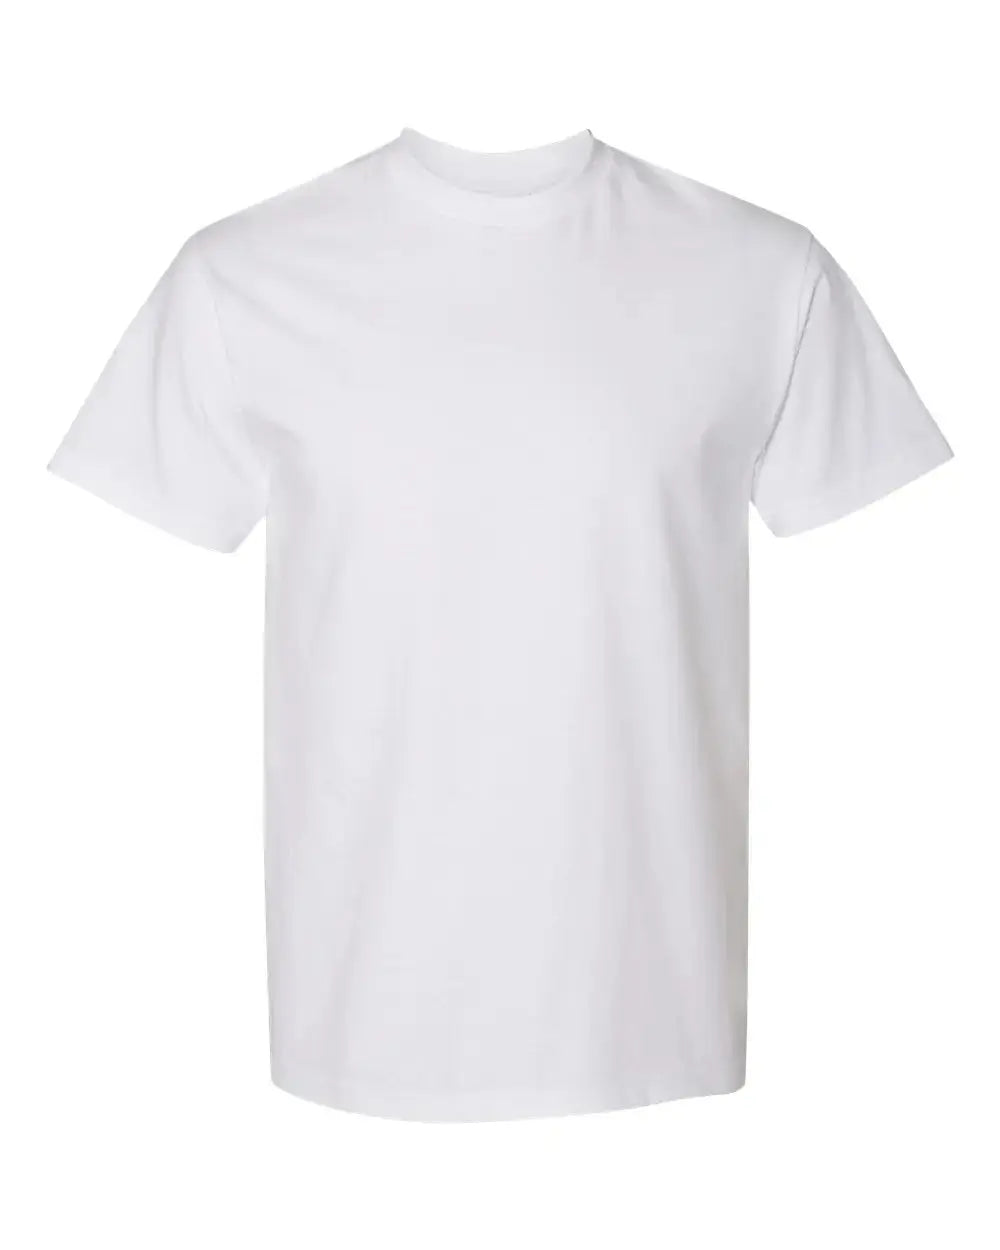 DTF(direct-to-film) Gildan H000 Hammer Adult Cotton T-shirt White